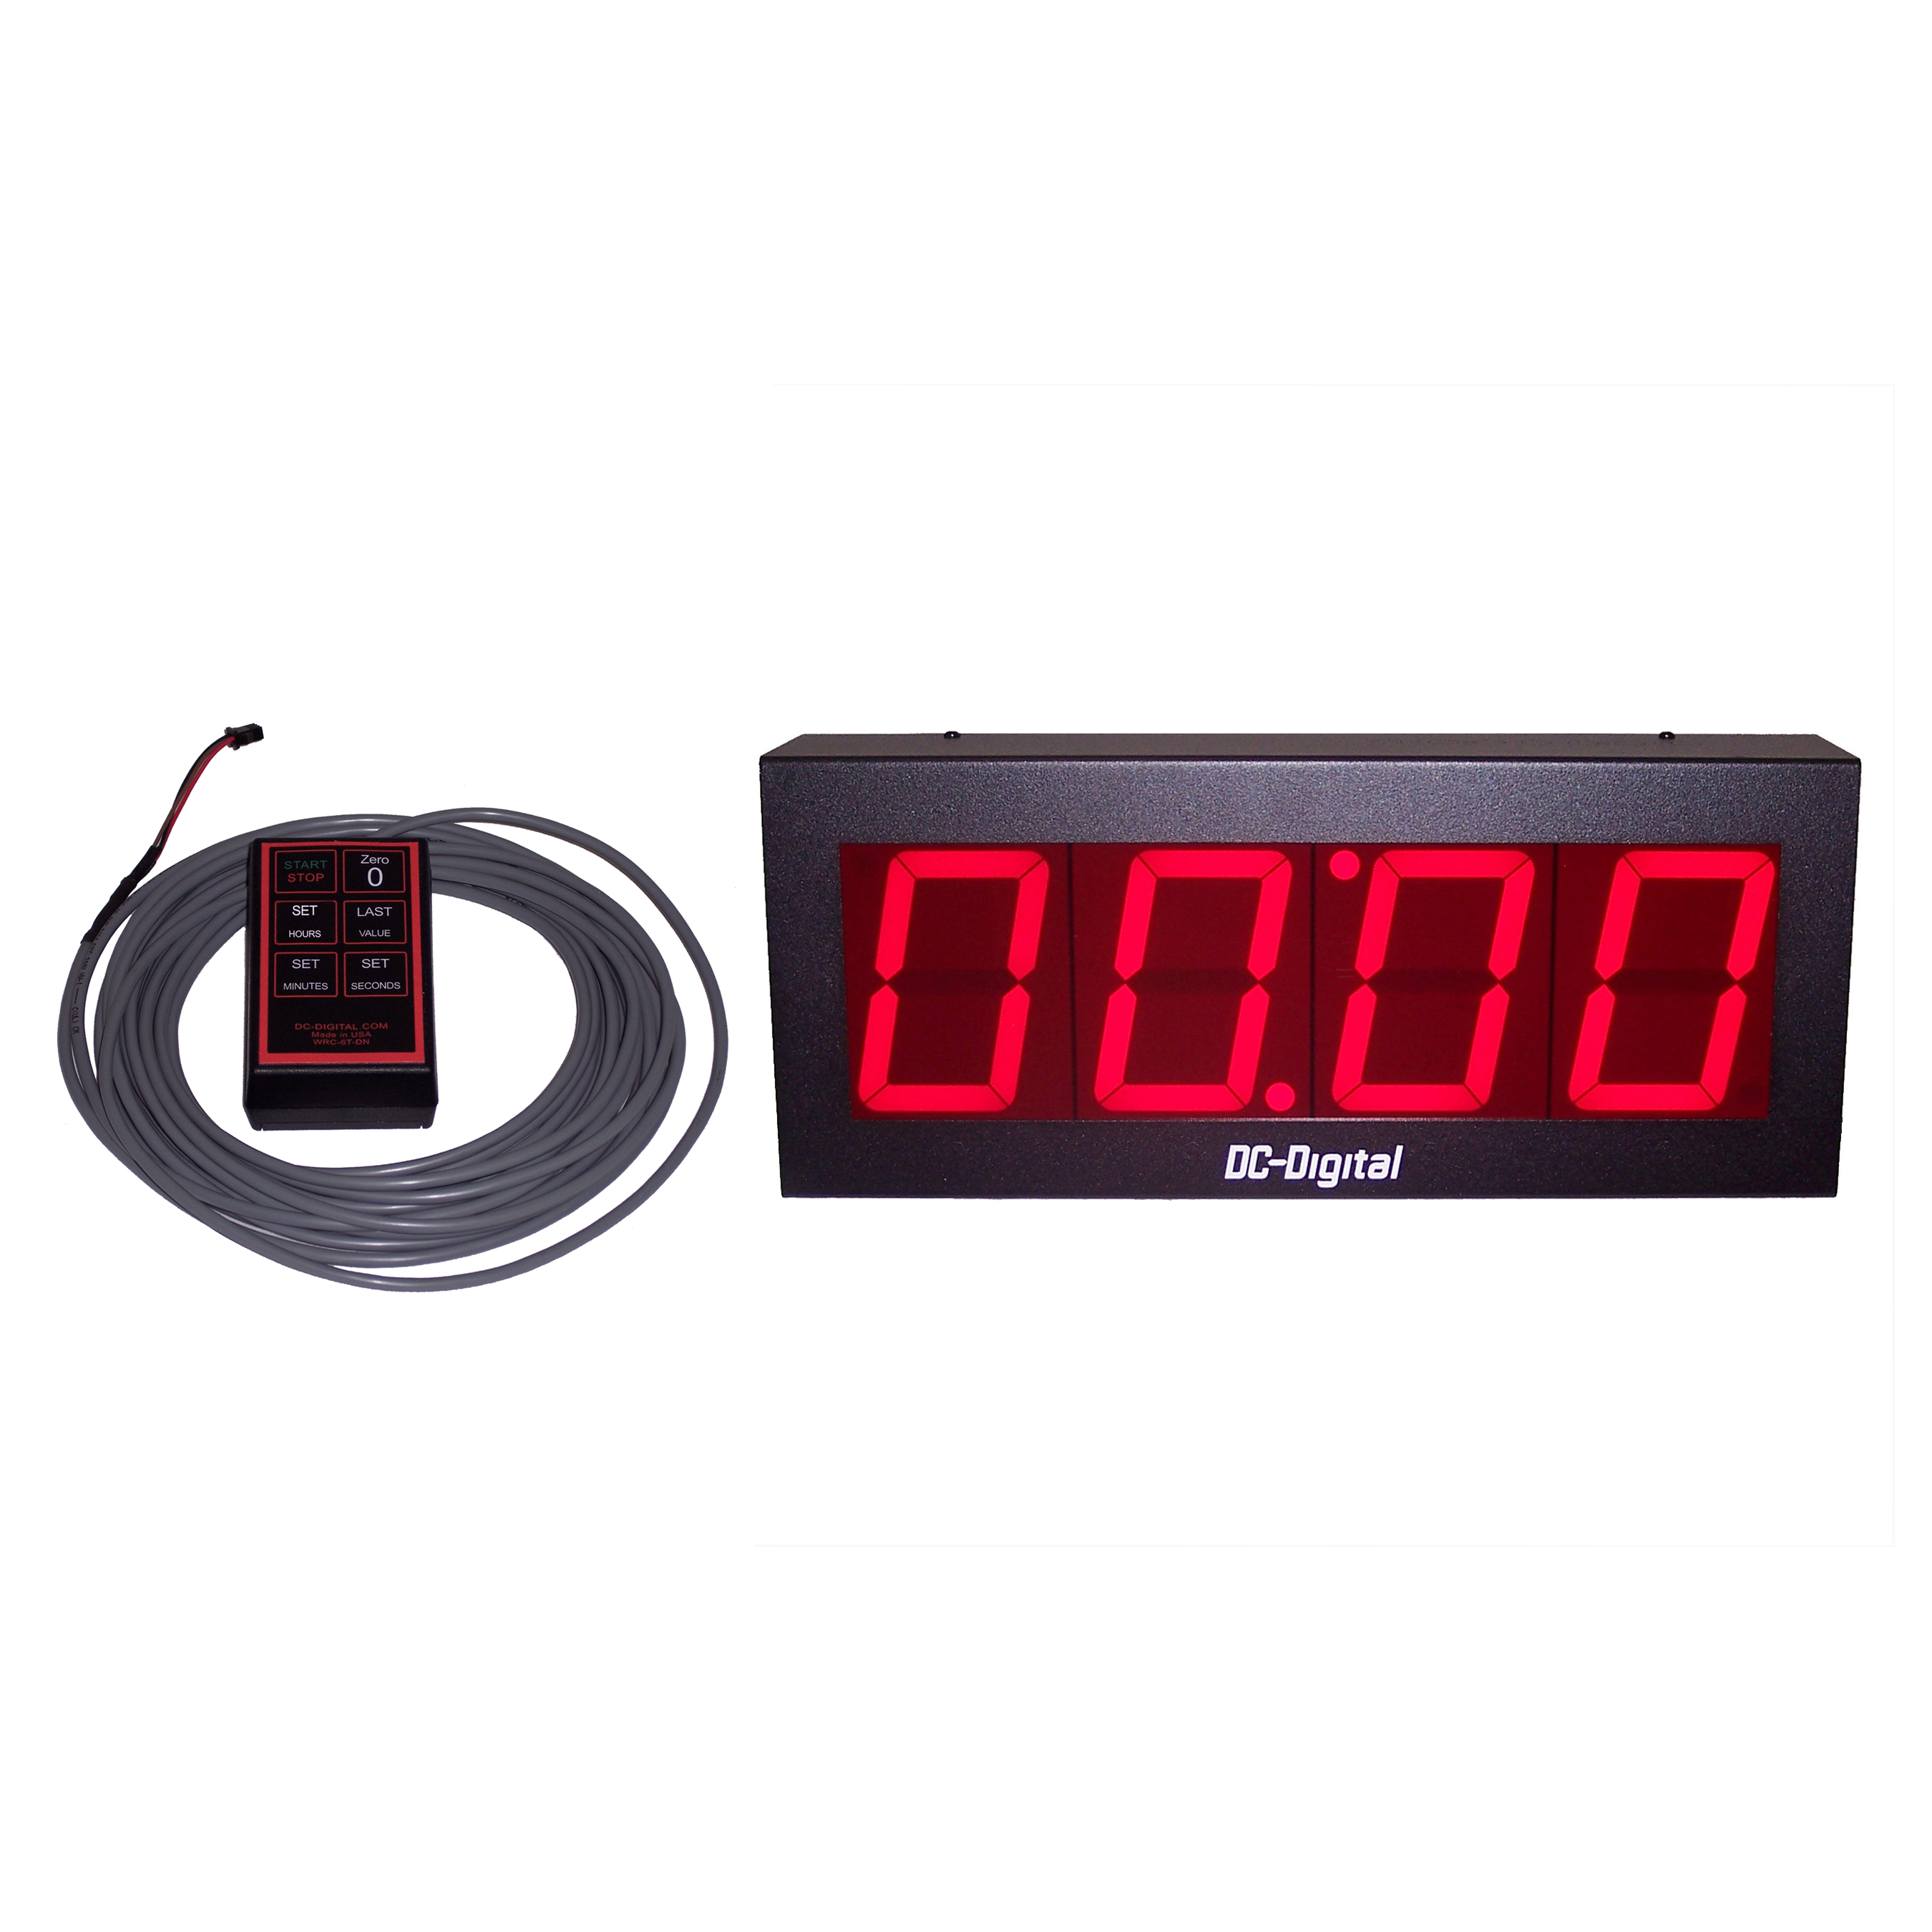 https://dc-digital.com/store/media/DC-40T-DN-WR-Wired-Remote-Controlled-Countdown-Timer-Clock-4-Inch.png